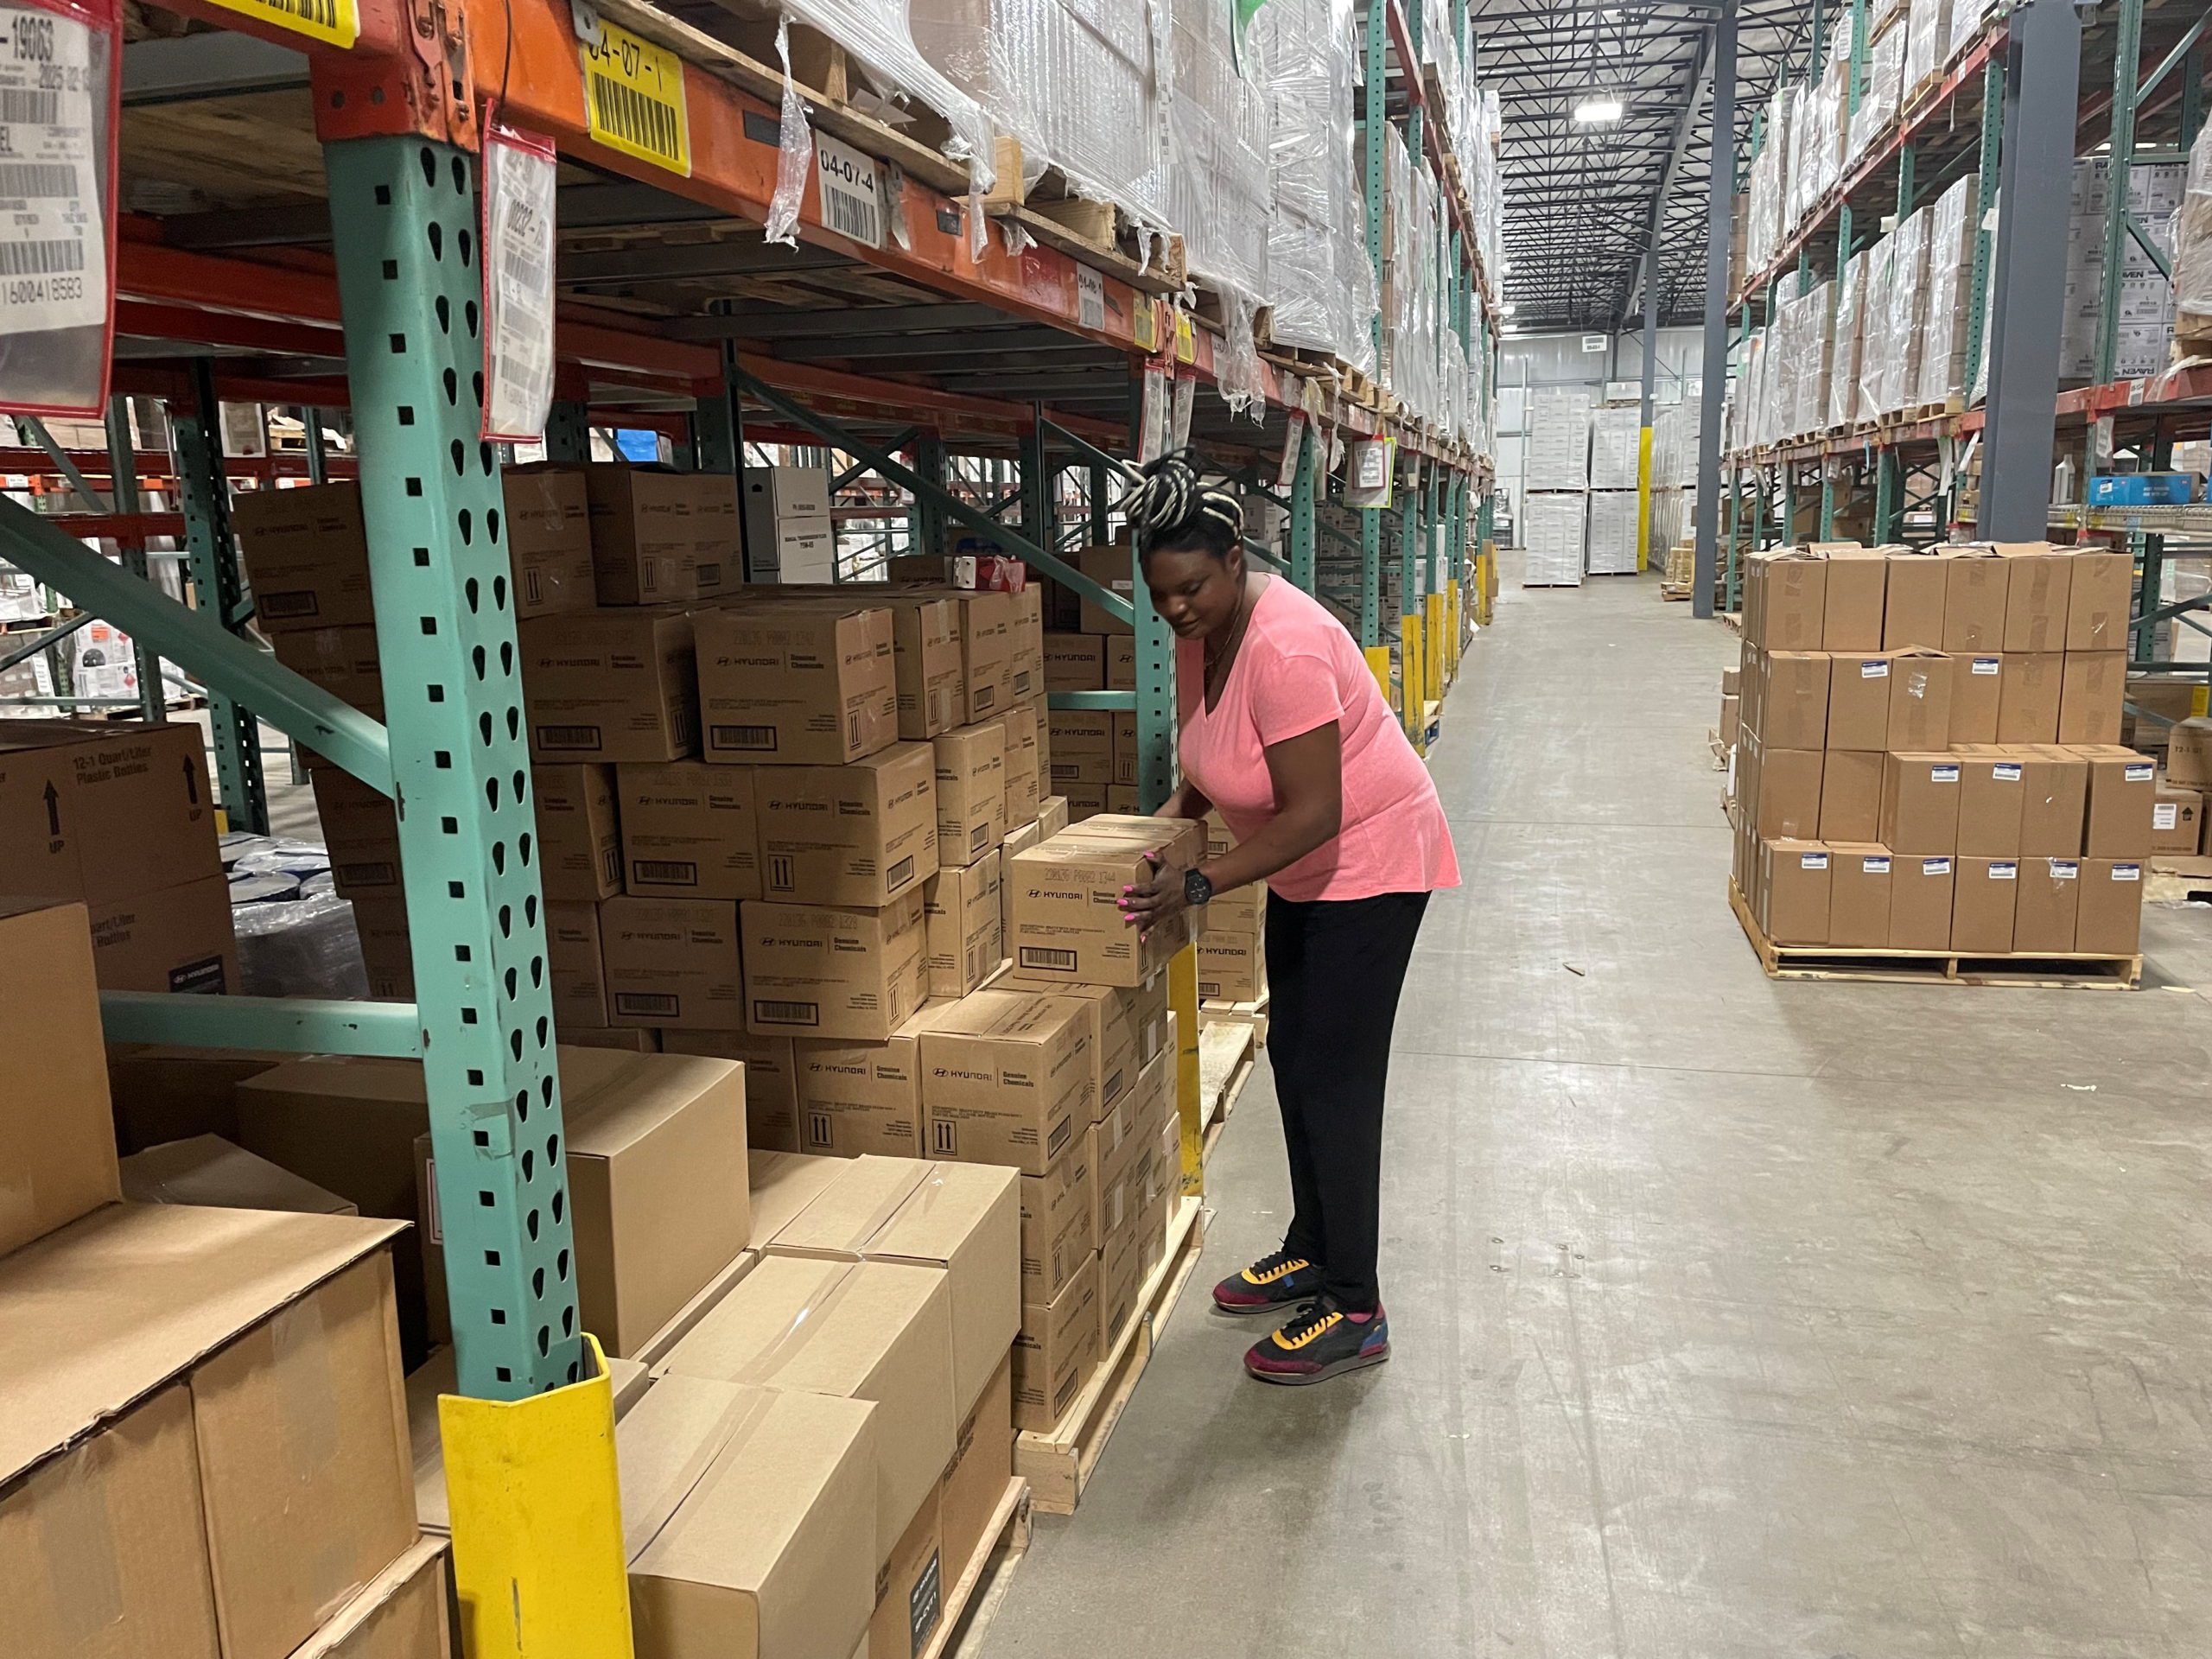 Sheila Ikenye picks boxes for a shipment at Kem Krest's warehouse in Elkhart, Indiana, U.S. March 24, 2022. REUTERS/Timothy Aeppel